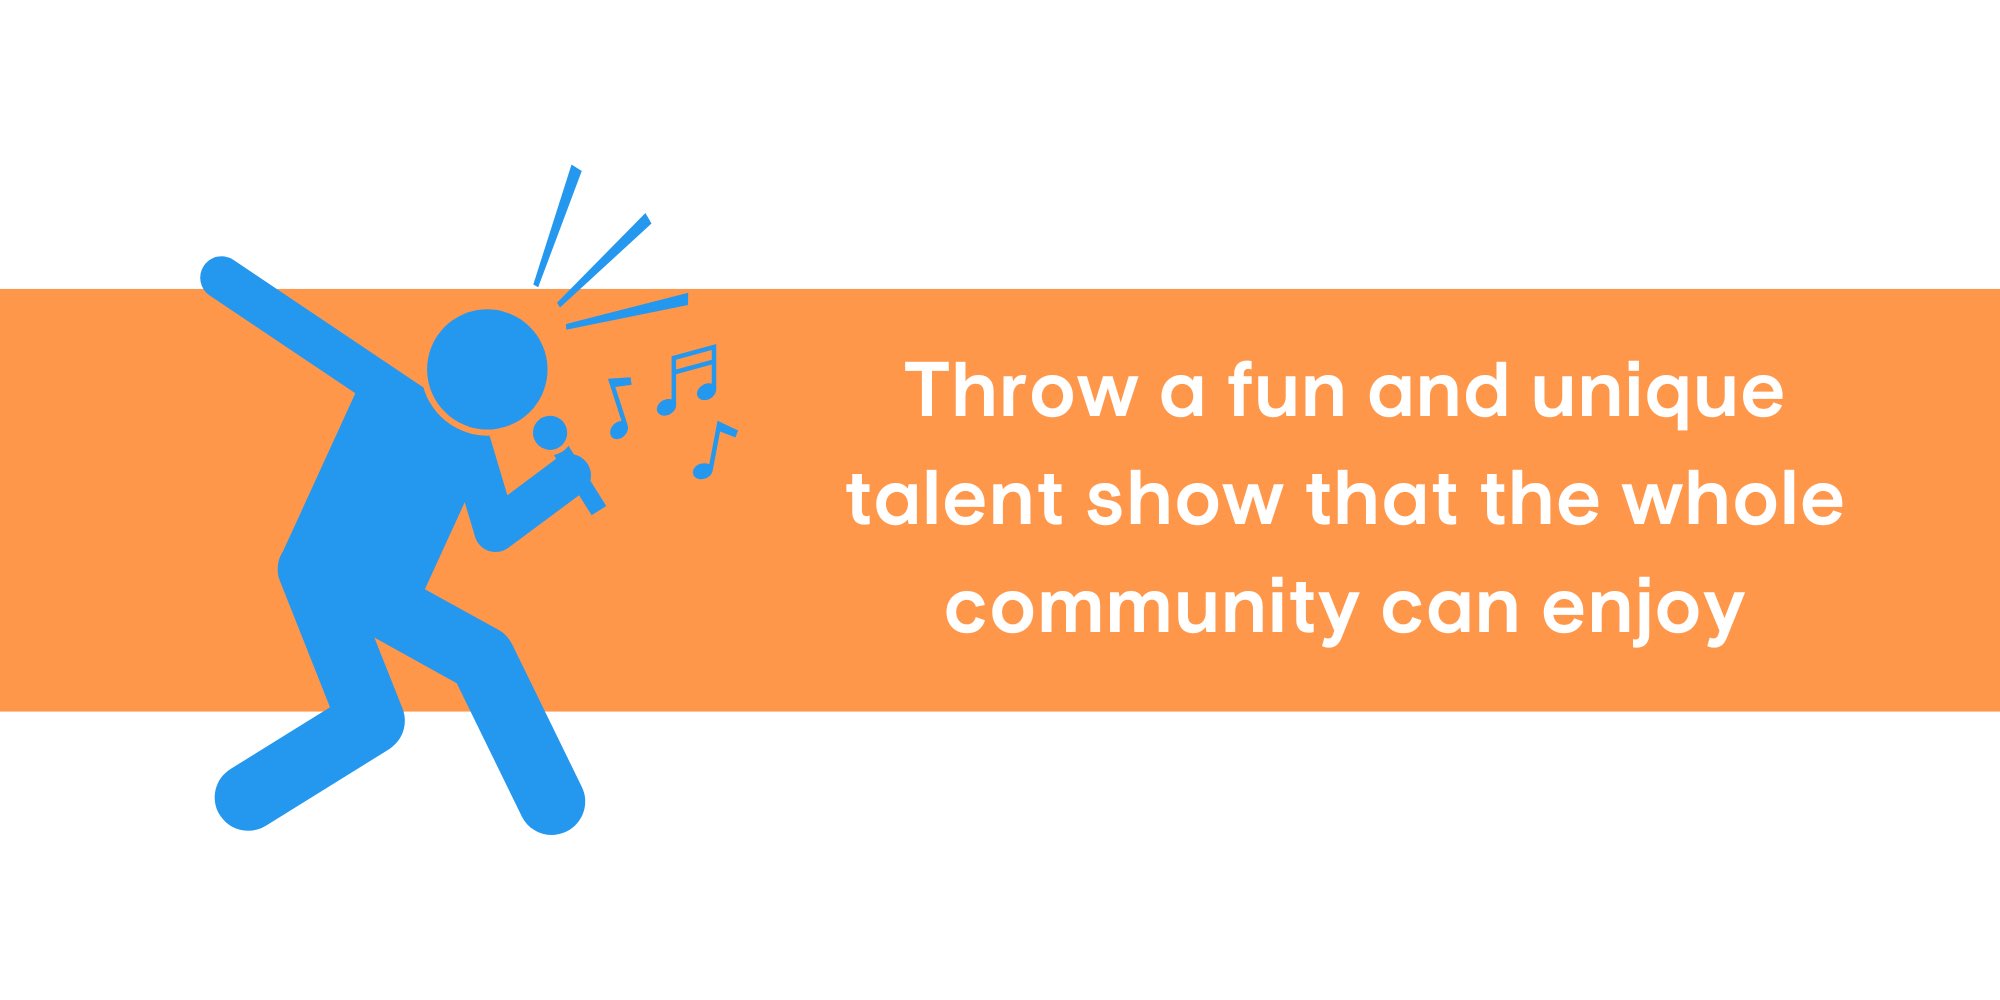 A talent show can help raise student camp funds